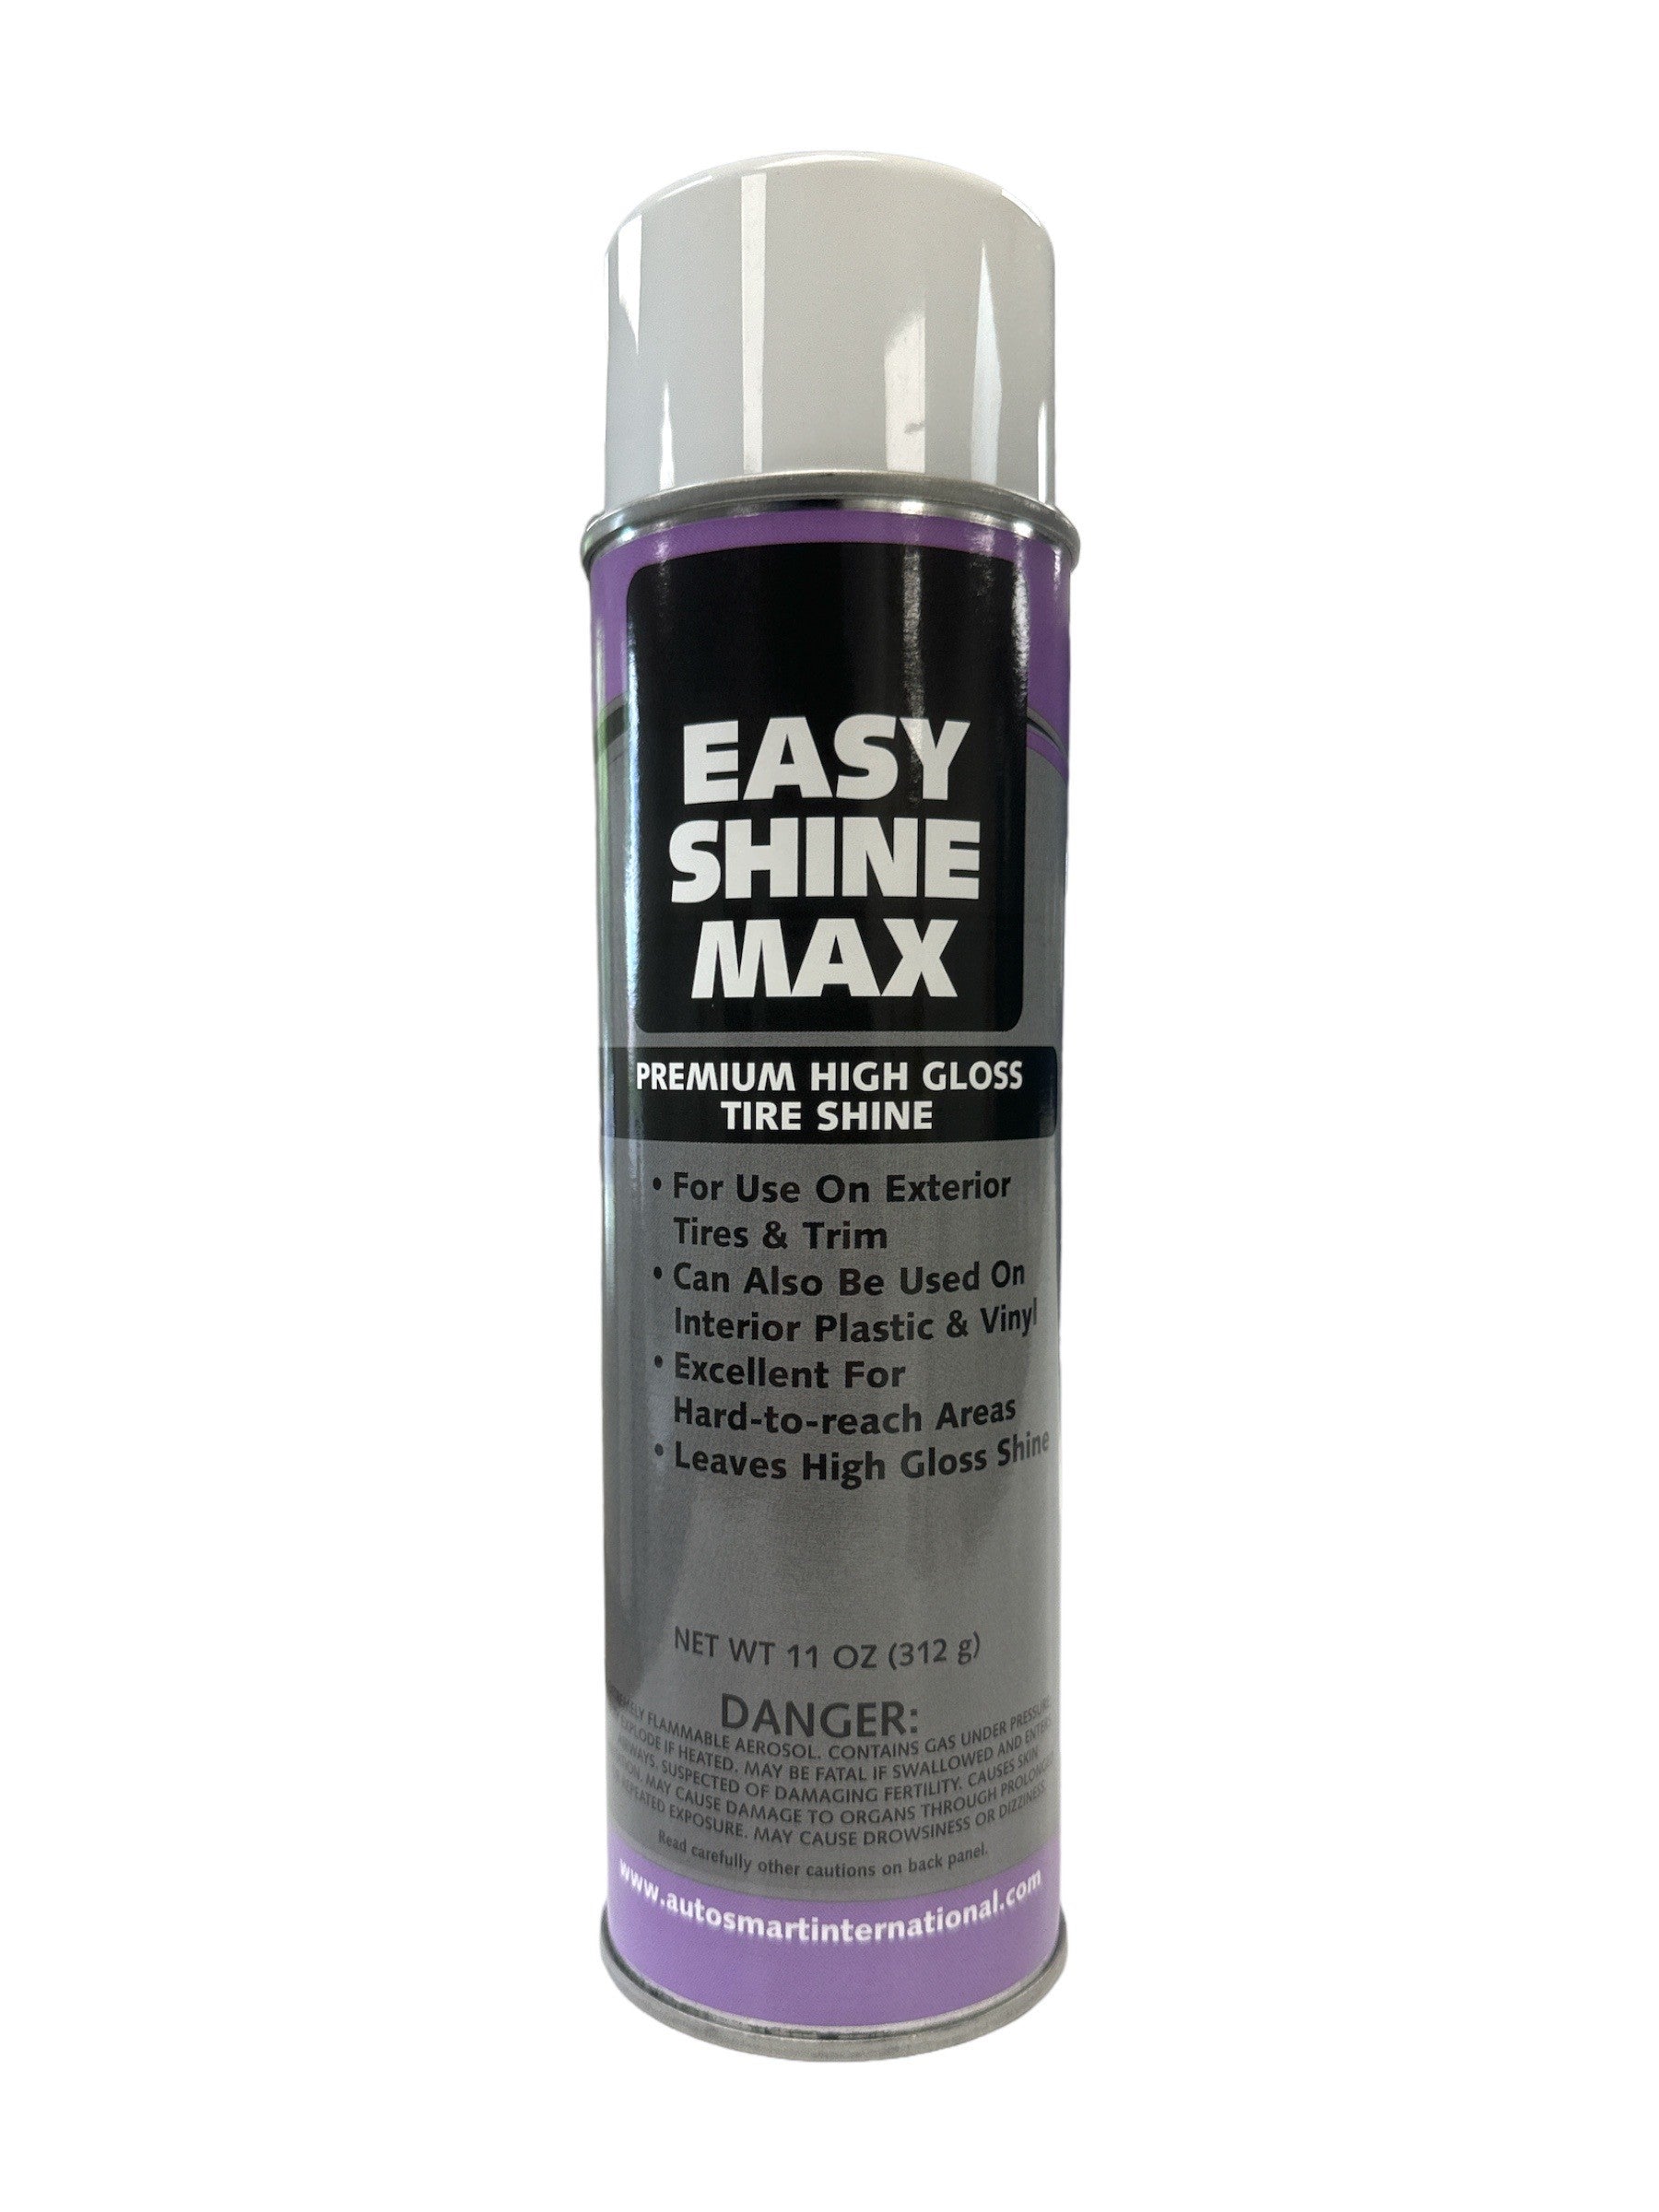 Easy Shine Max - Tire shine 11ozPremium aerosol tire shine and trim shine. High gloss for maximum shine. Convenient, easy to use spray enables the user to quickly shine their tires or trim in a flash. Long lasting shine will help keep your tires and trim